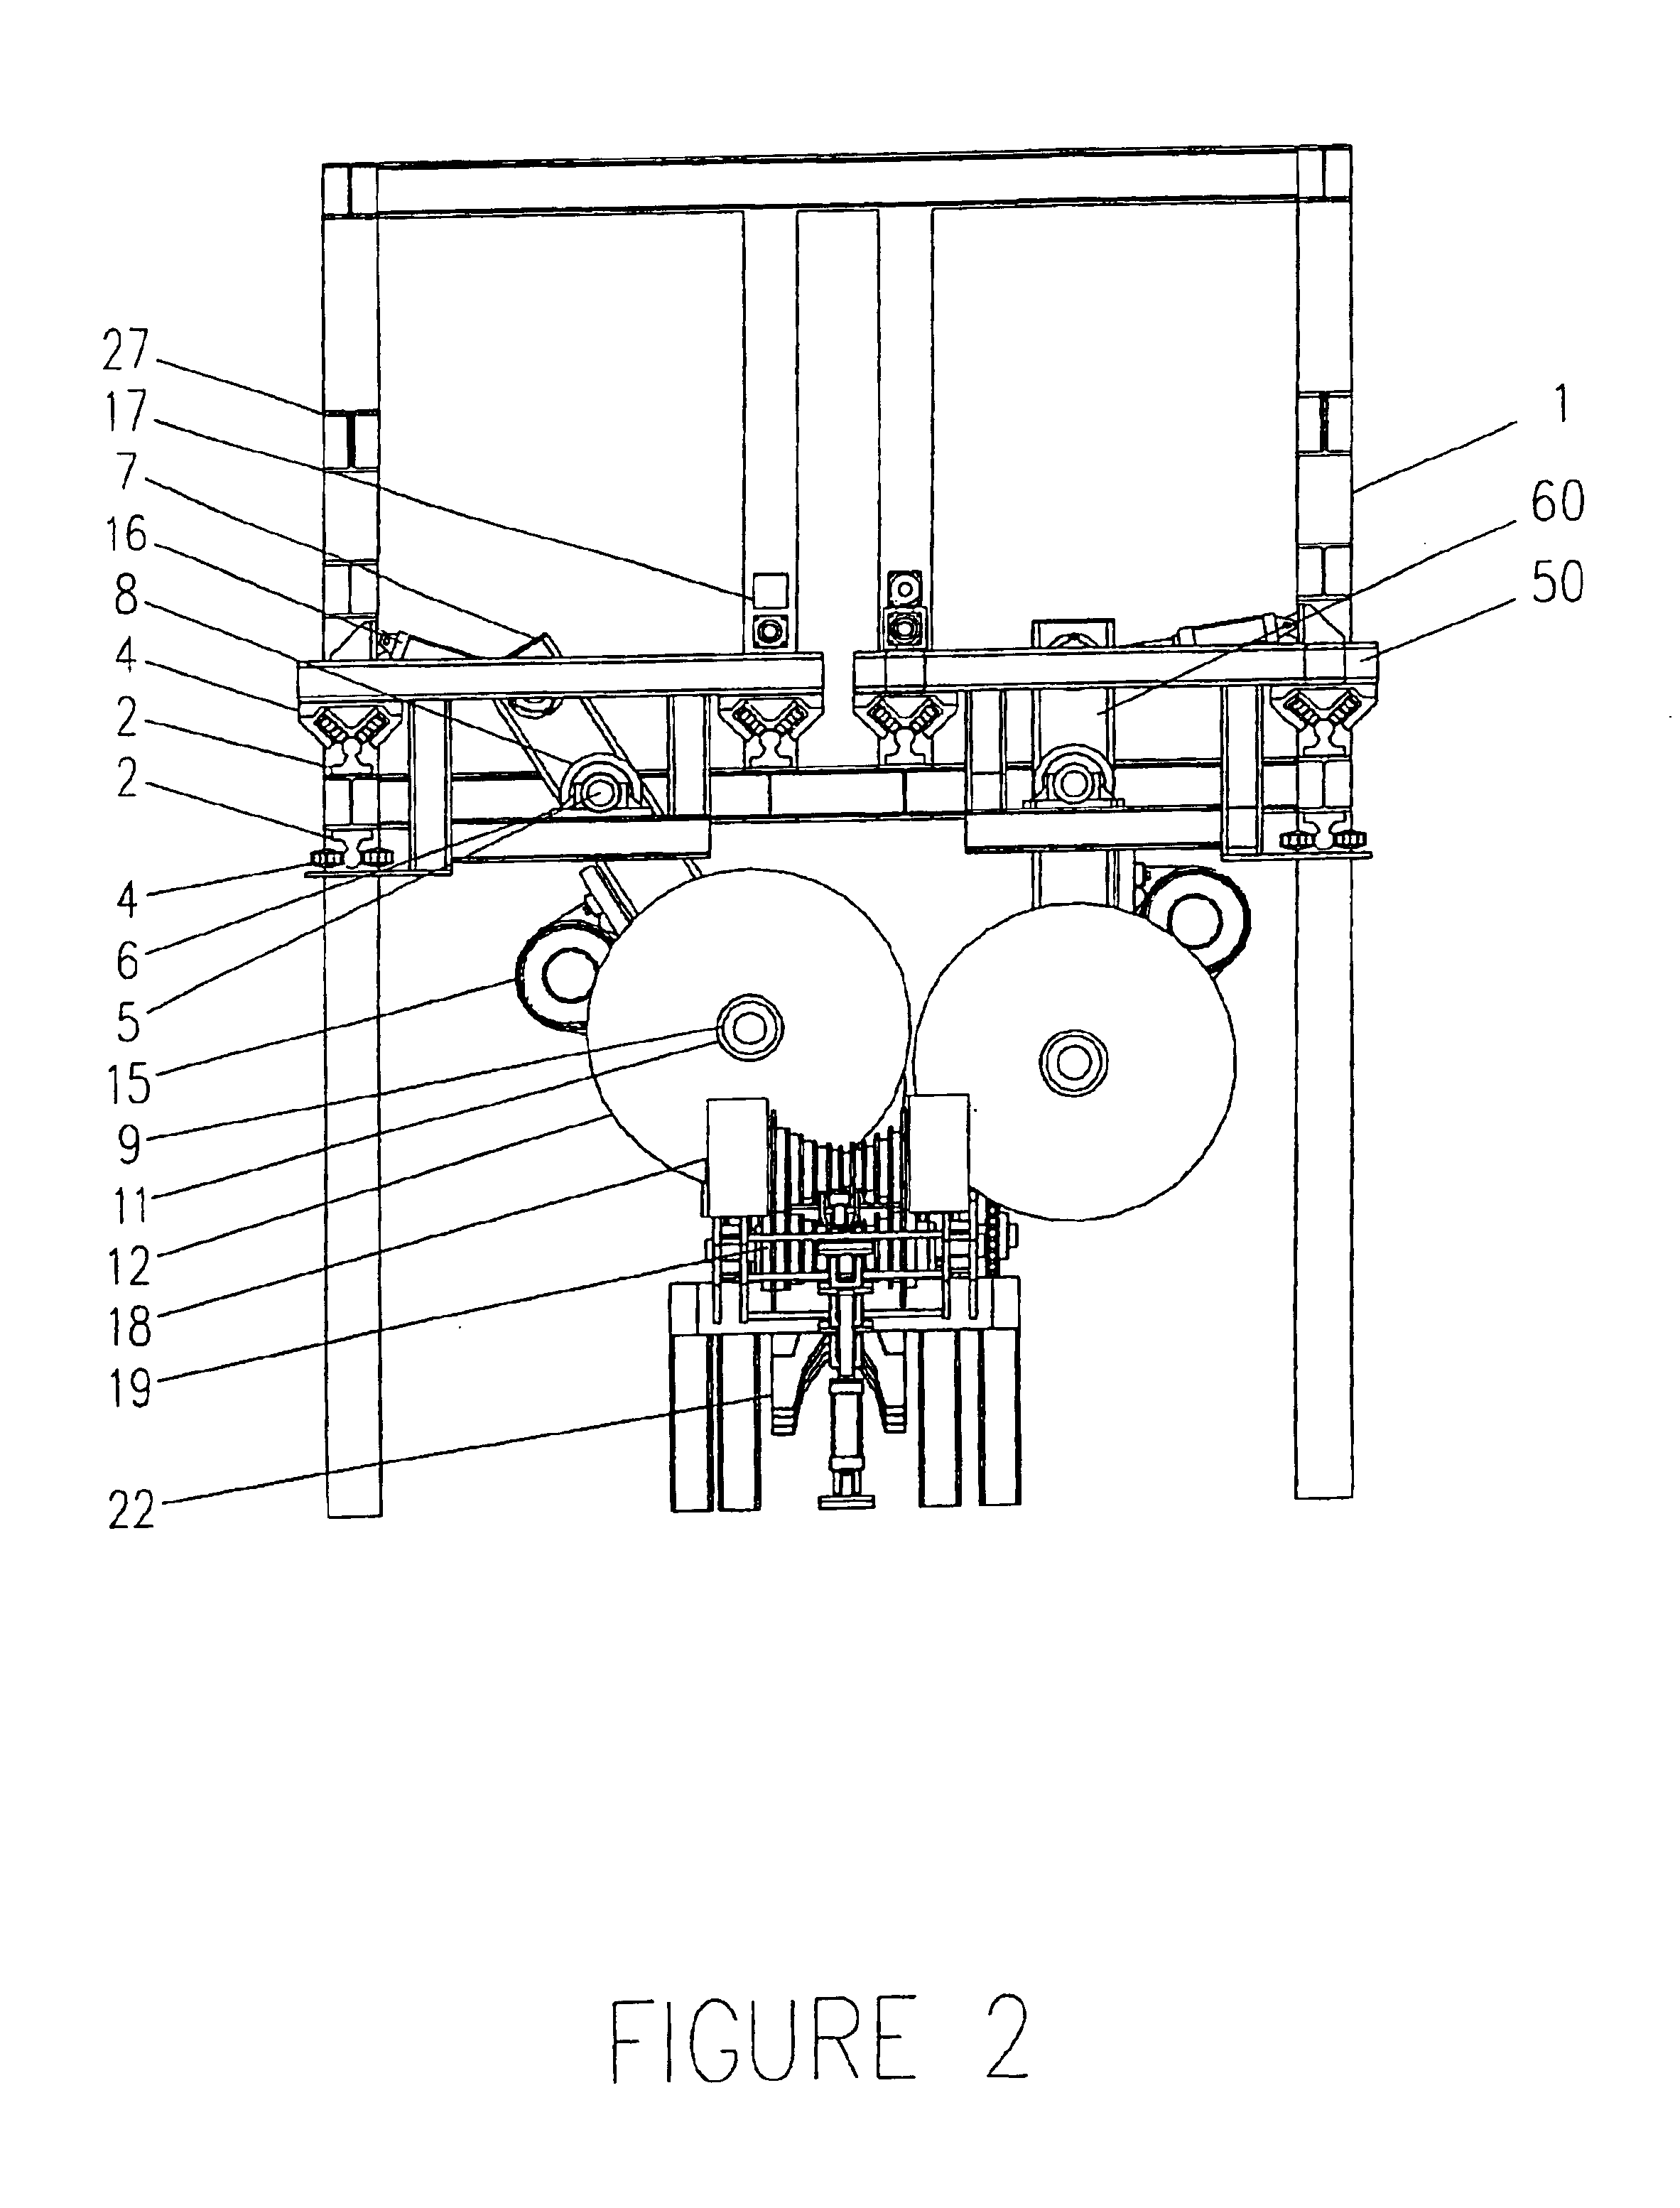 Continuous log bucking saw system and method